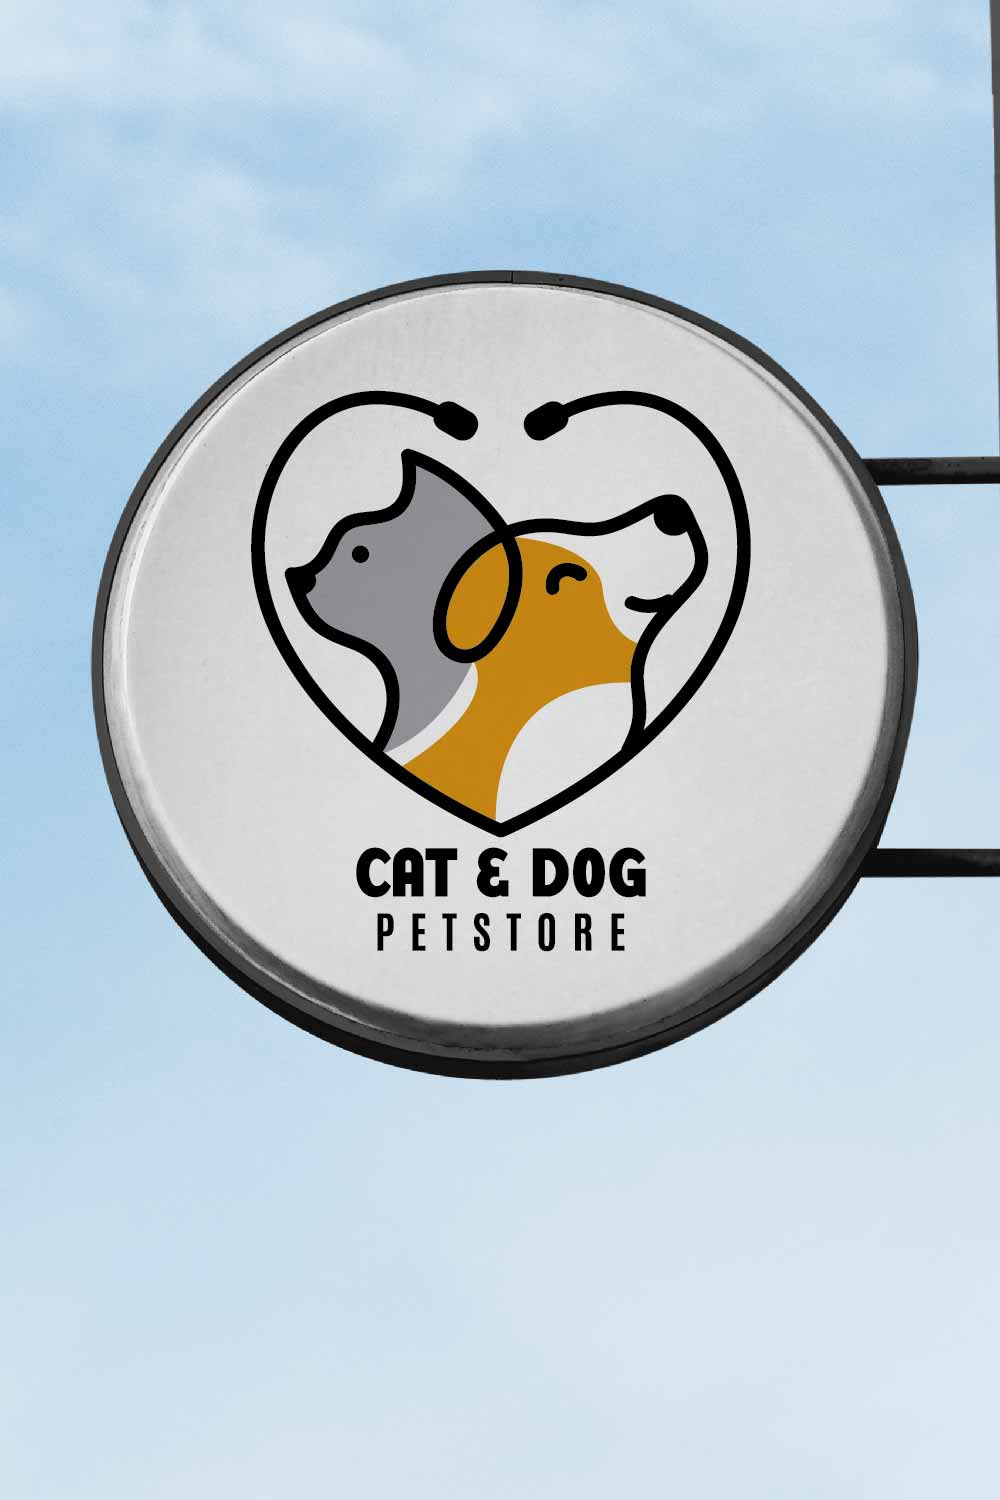 Dog and cat logo for veterinary or petshop pinterest preview image.